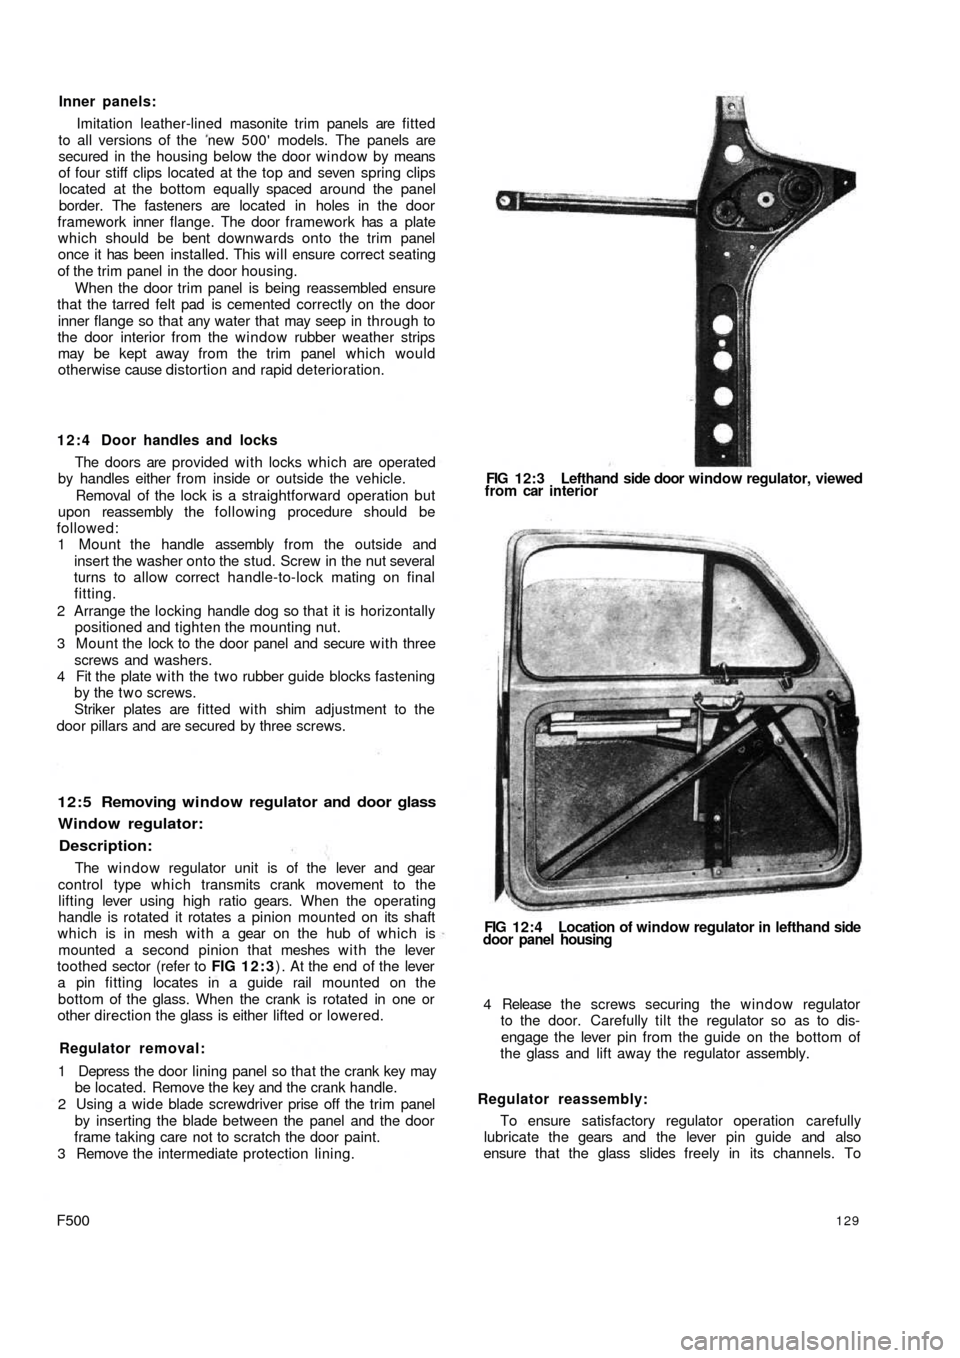 FIAT 500 1972 1.G Workshop Manual Inner panels:
Imitation leather-lined masonite trim panels are fitted
to all versions of the  new 500 models. The panels are
secured in the housing below the door window by means
of four stiff clips 